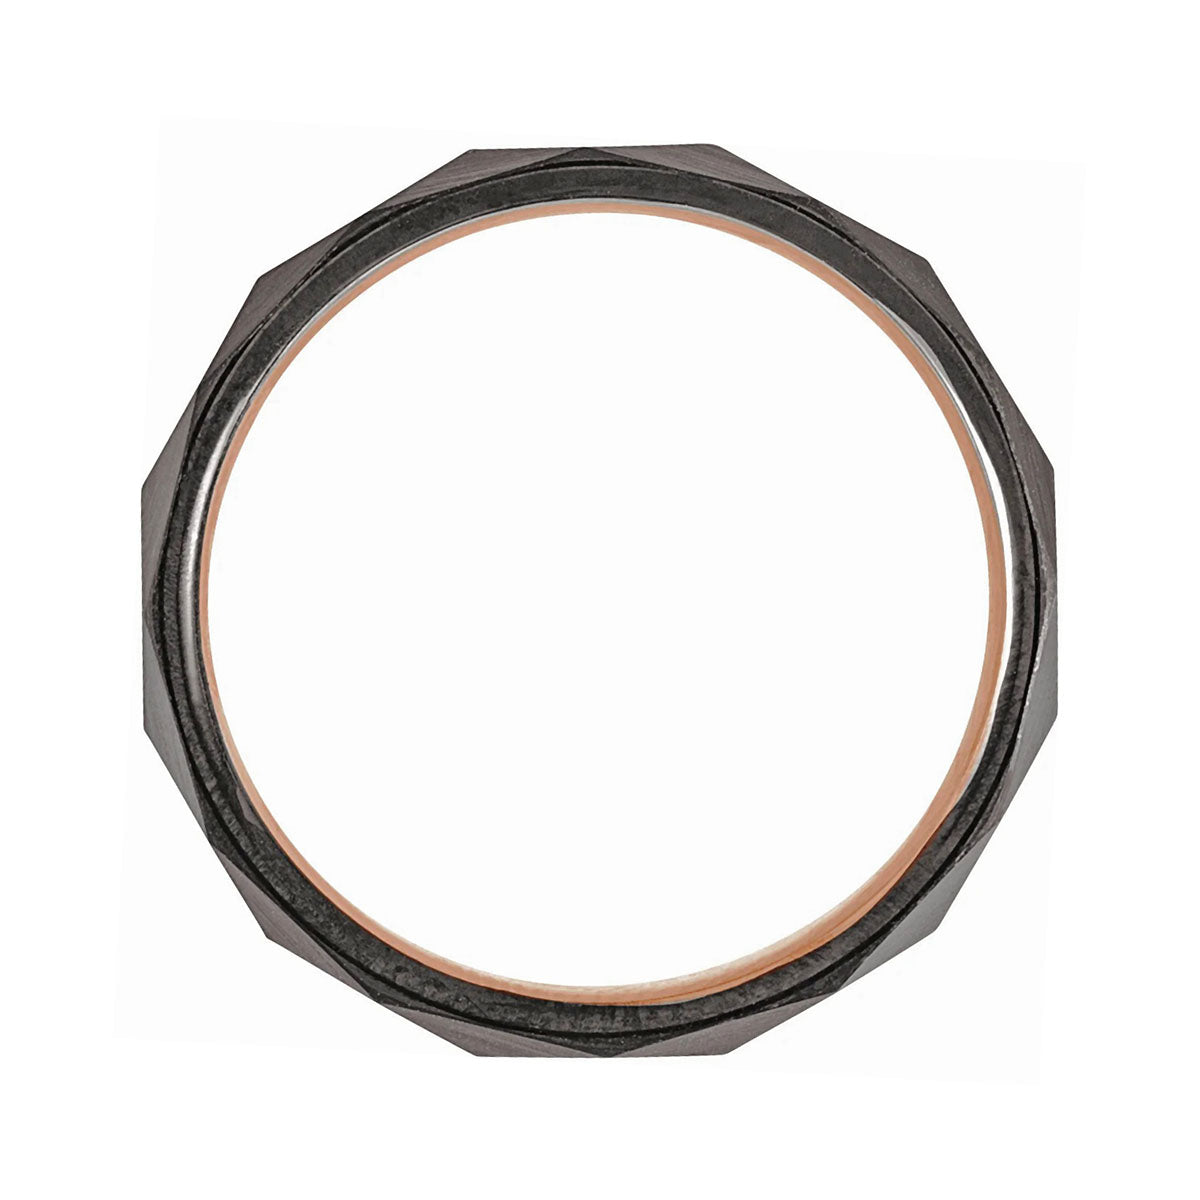 Faceted Black Tungsten Wedding Band with Rose Gold Interior